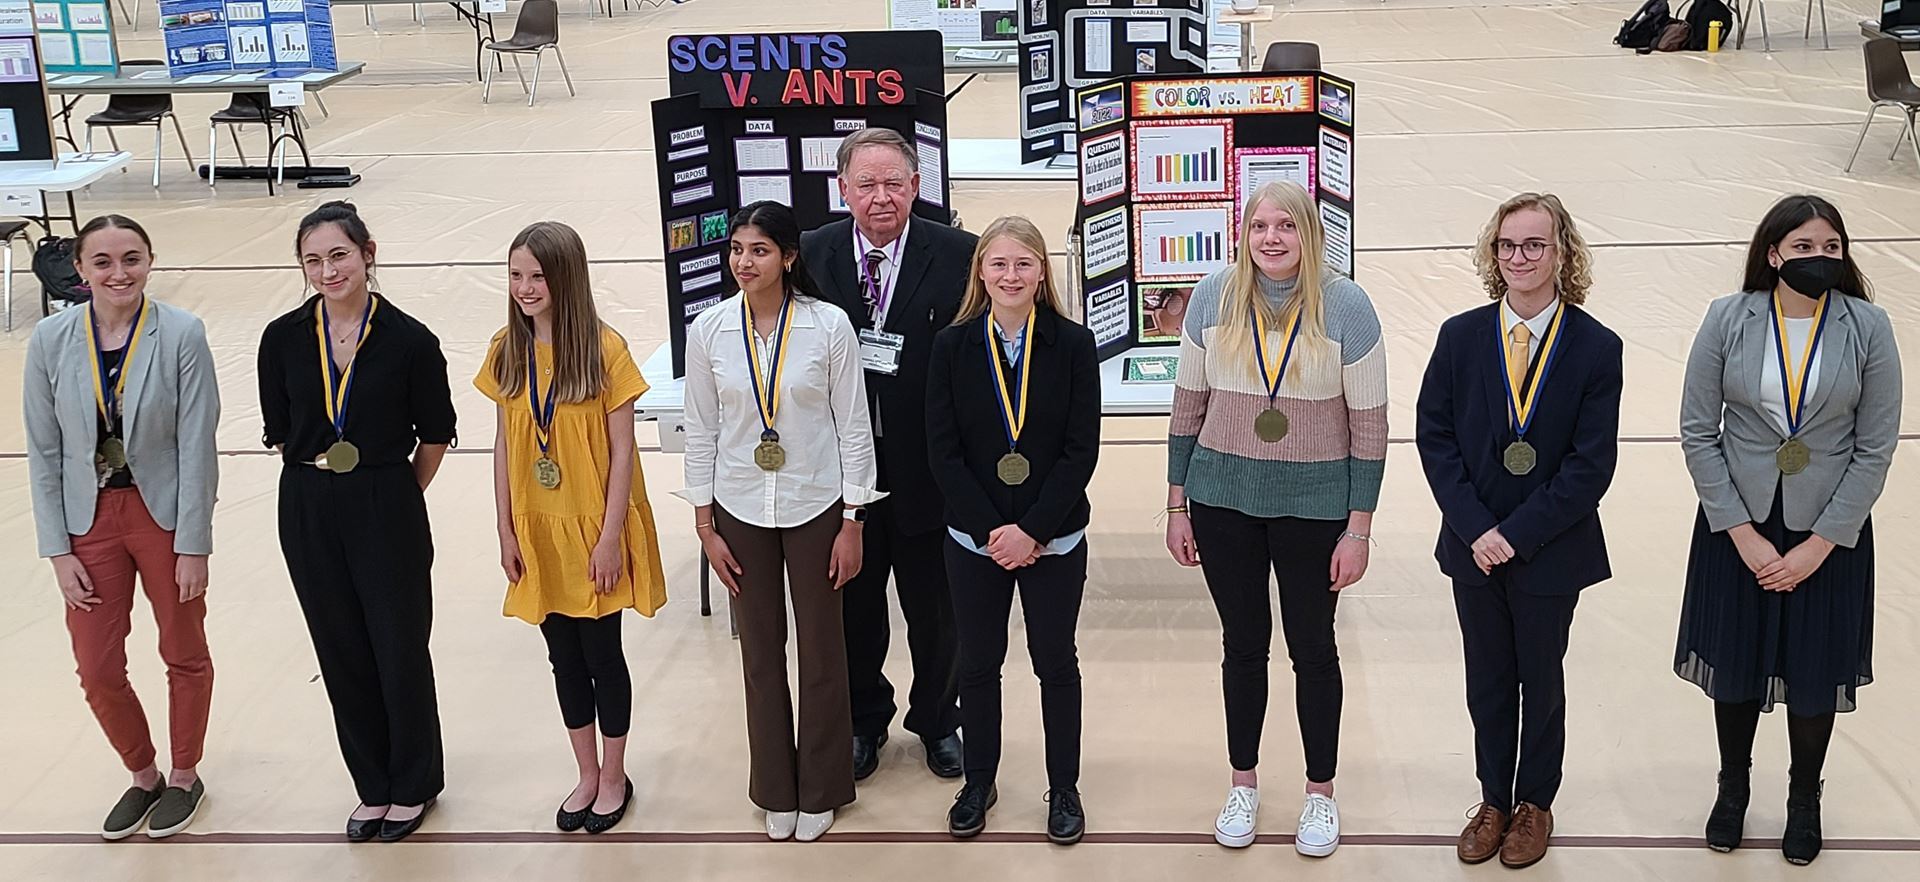 photo 8 ninth to twelfth grade students posing for photo with medals won for being the Nebraska state science fair high school 2022 winners. Students mentor president of the Nebraska Junior Academy of Science stands behind them  